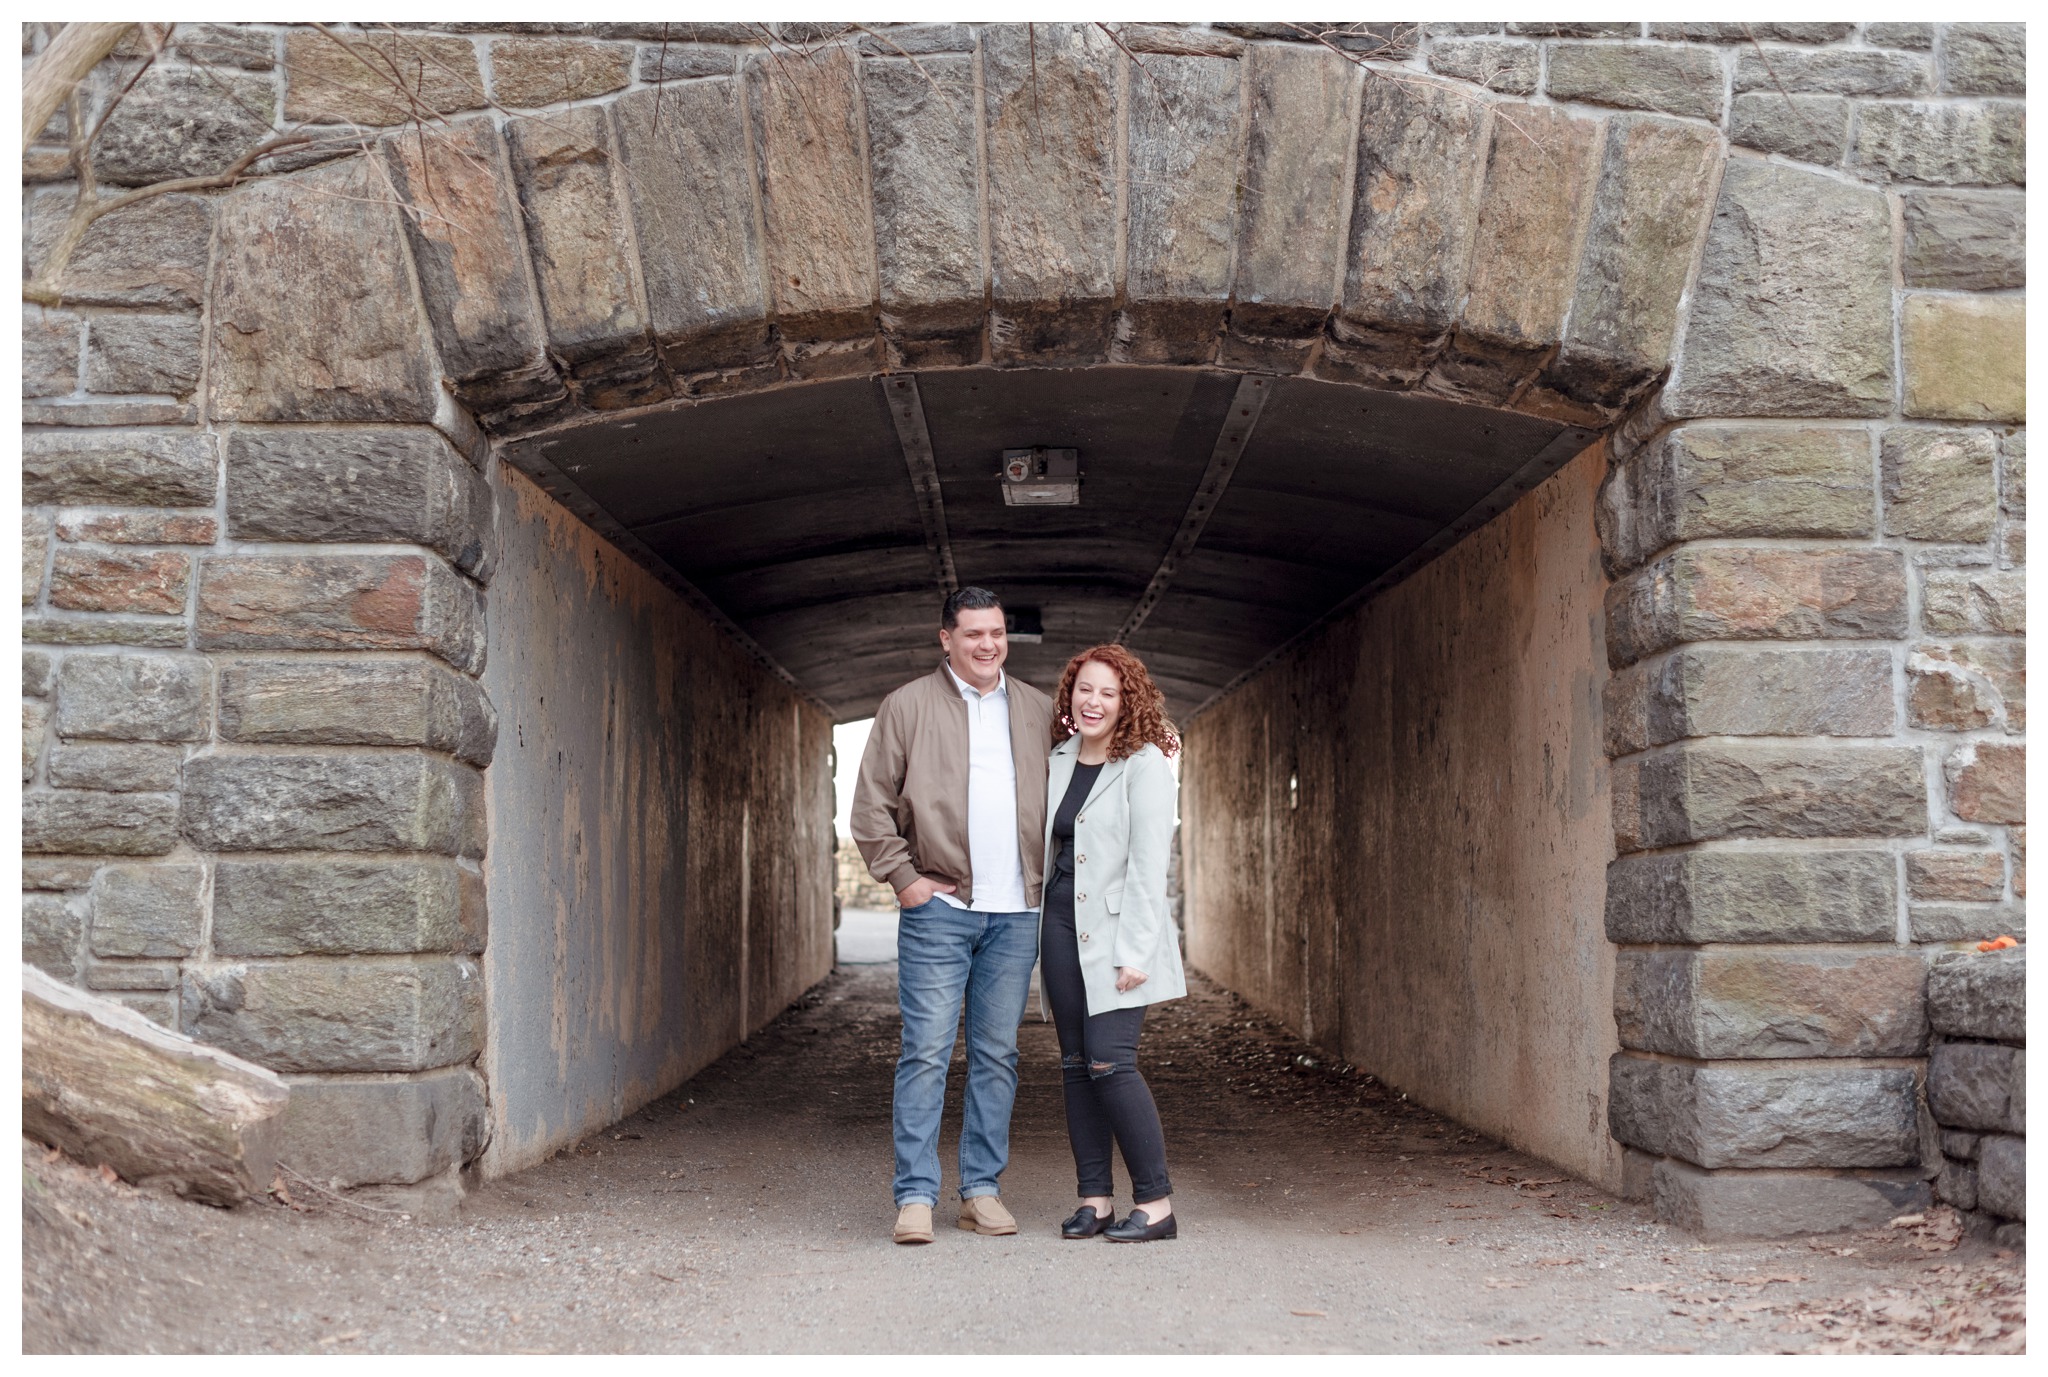 fort tryon park engagement session under stone arches